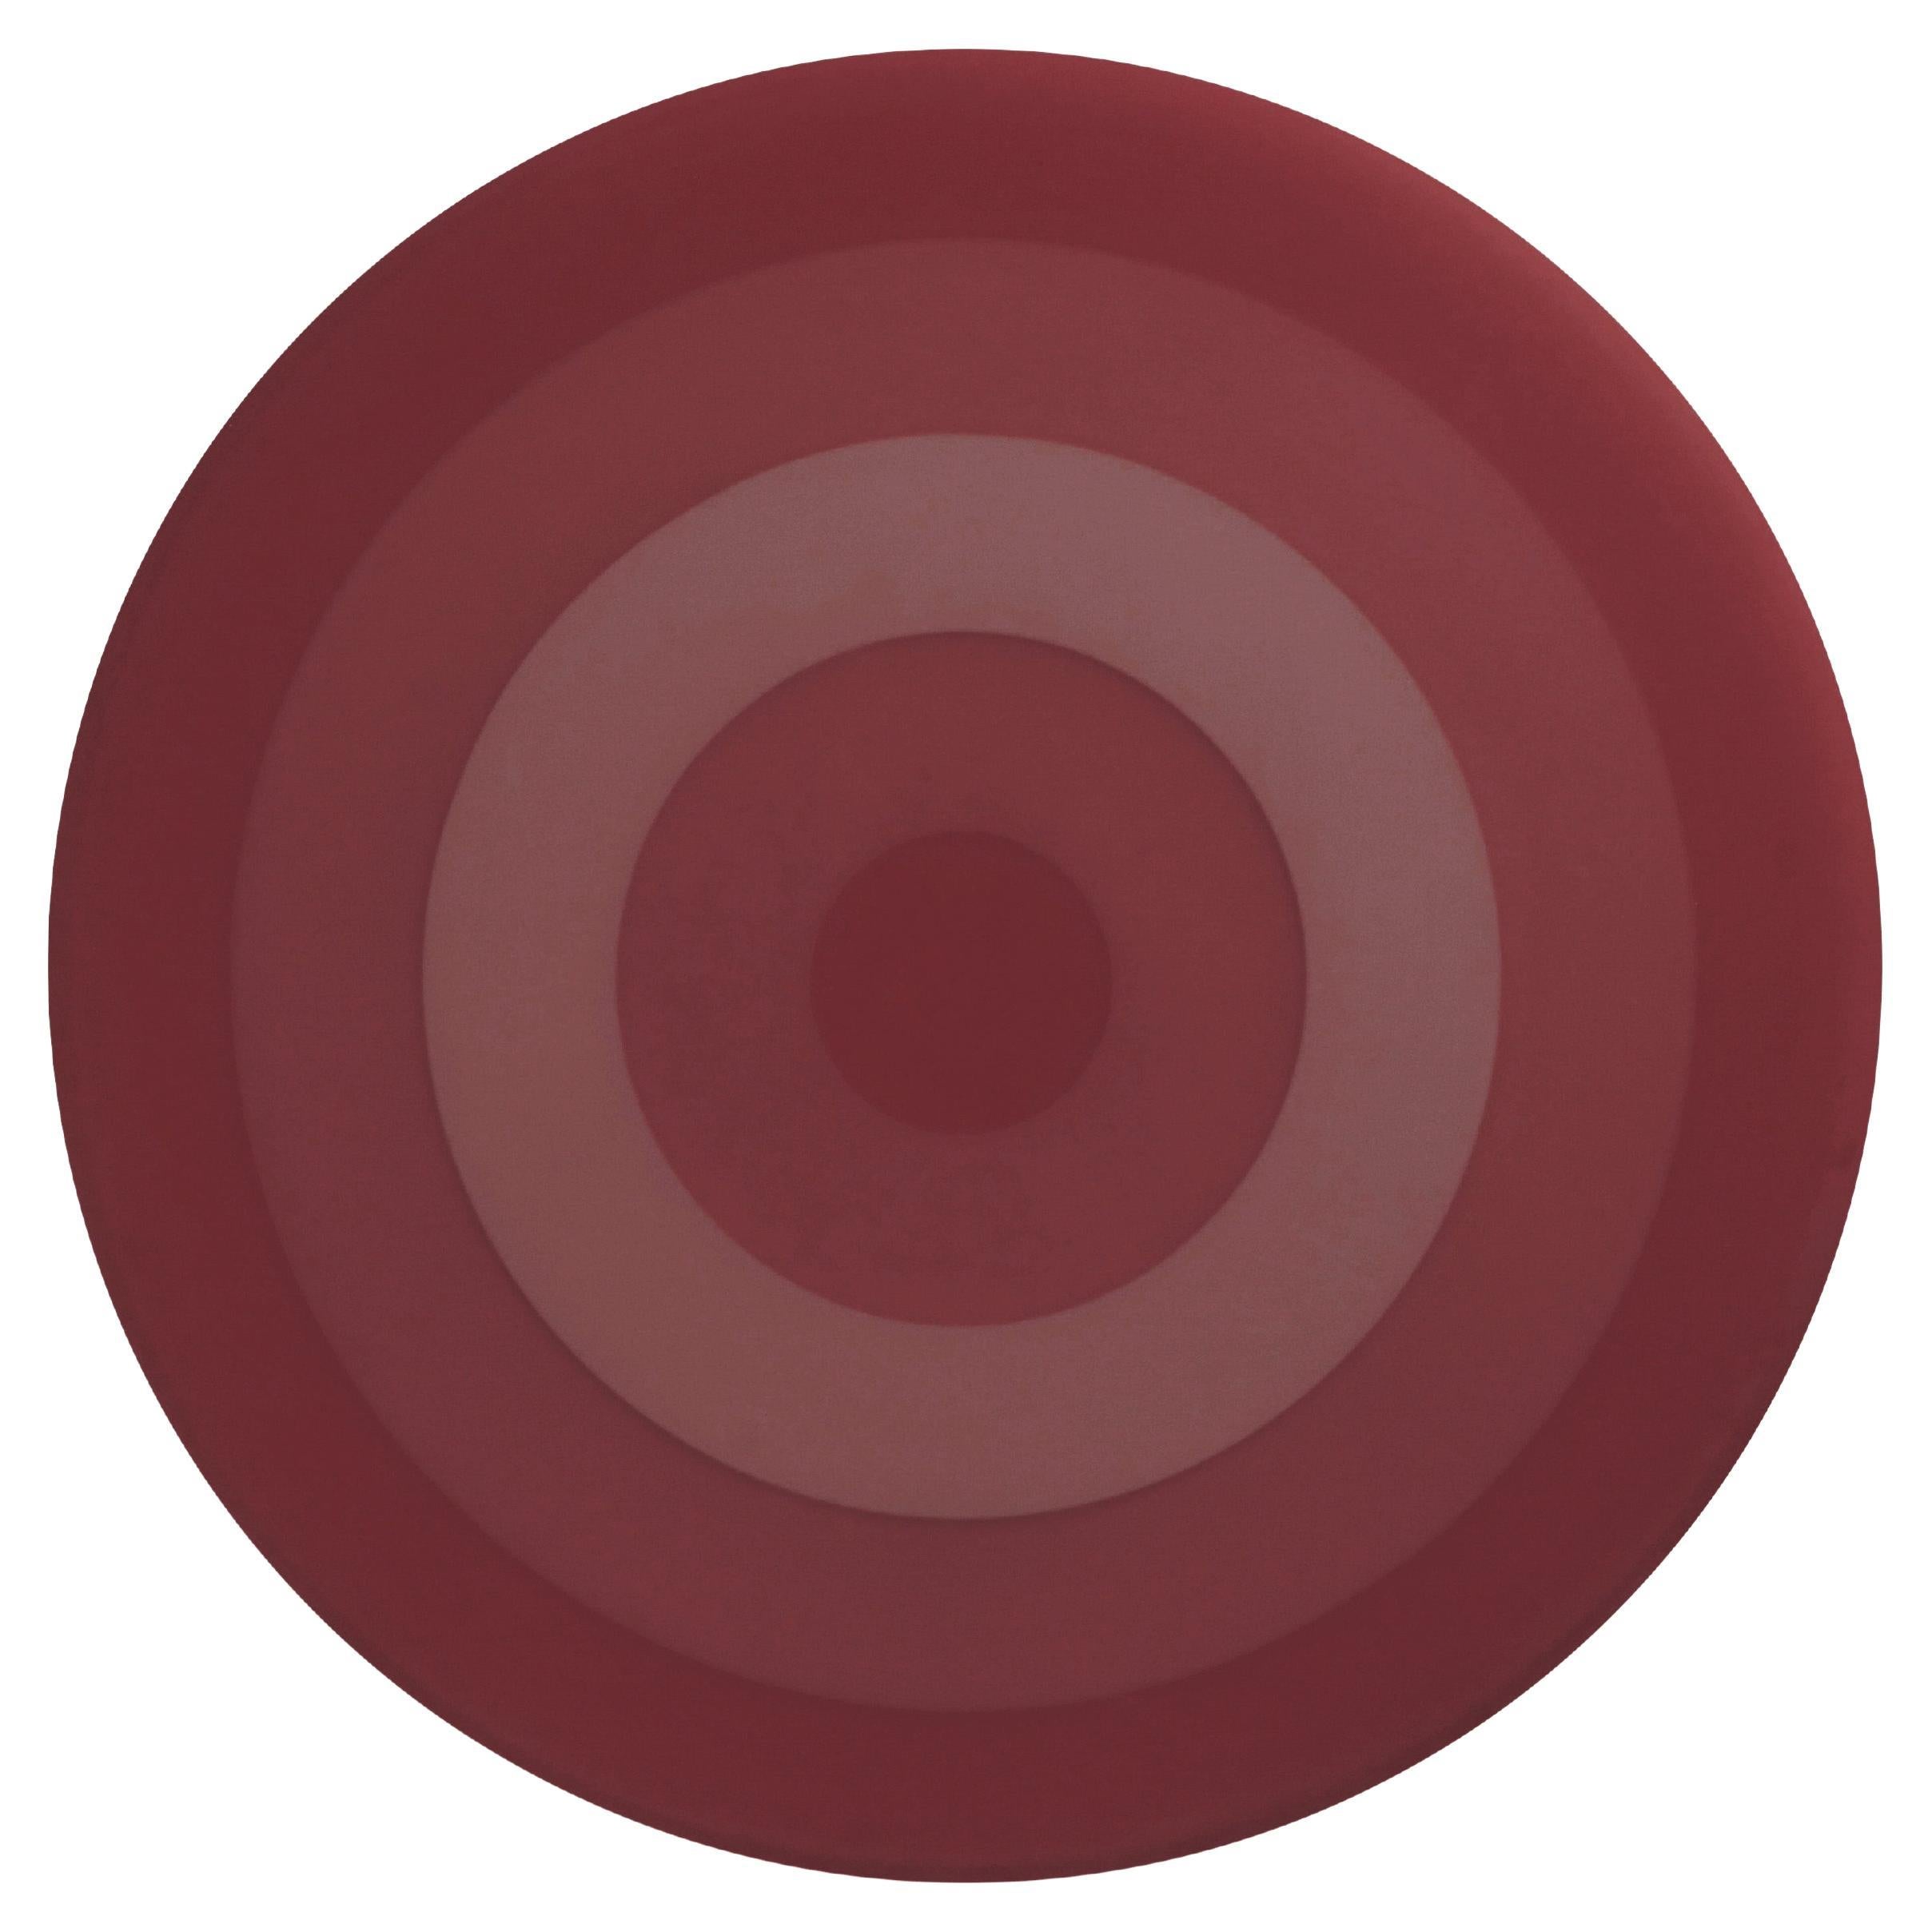 Scale Rings Resin Wall Decor In Burgundy by Facture, REP by Tuleste Factory